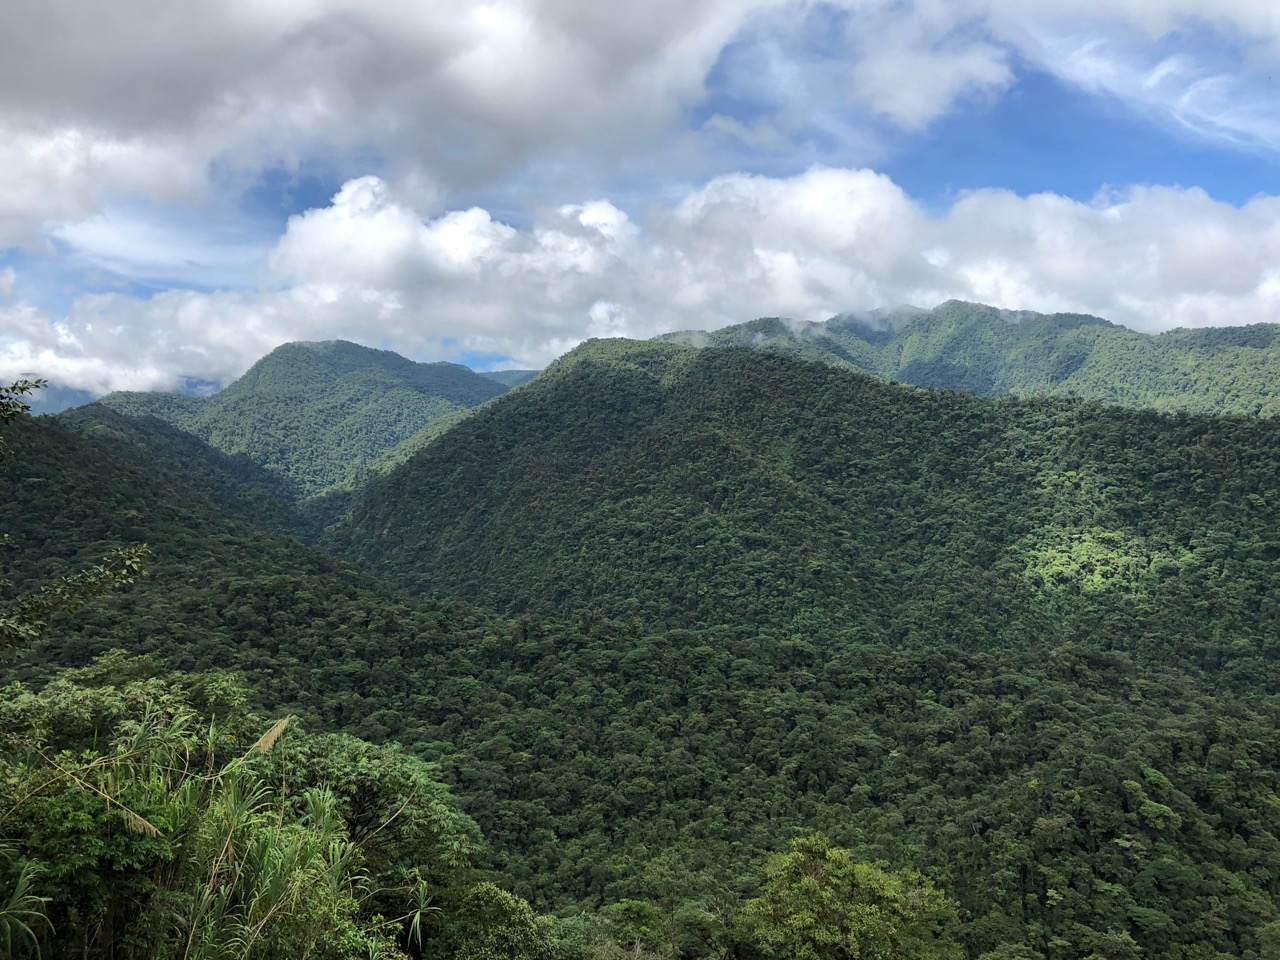 A typical Costa Rican landscape